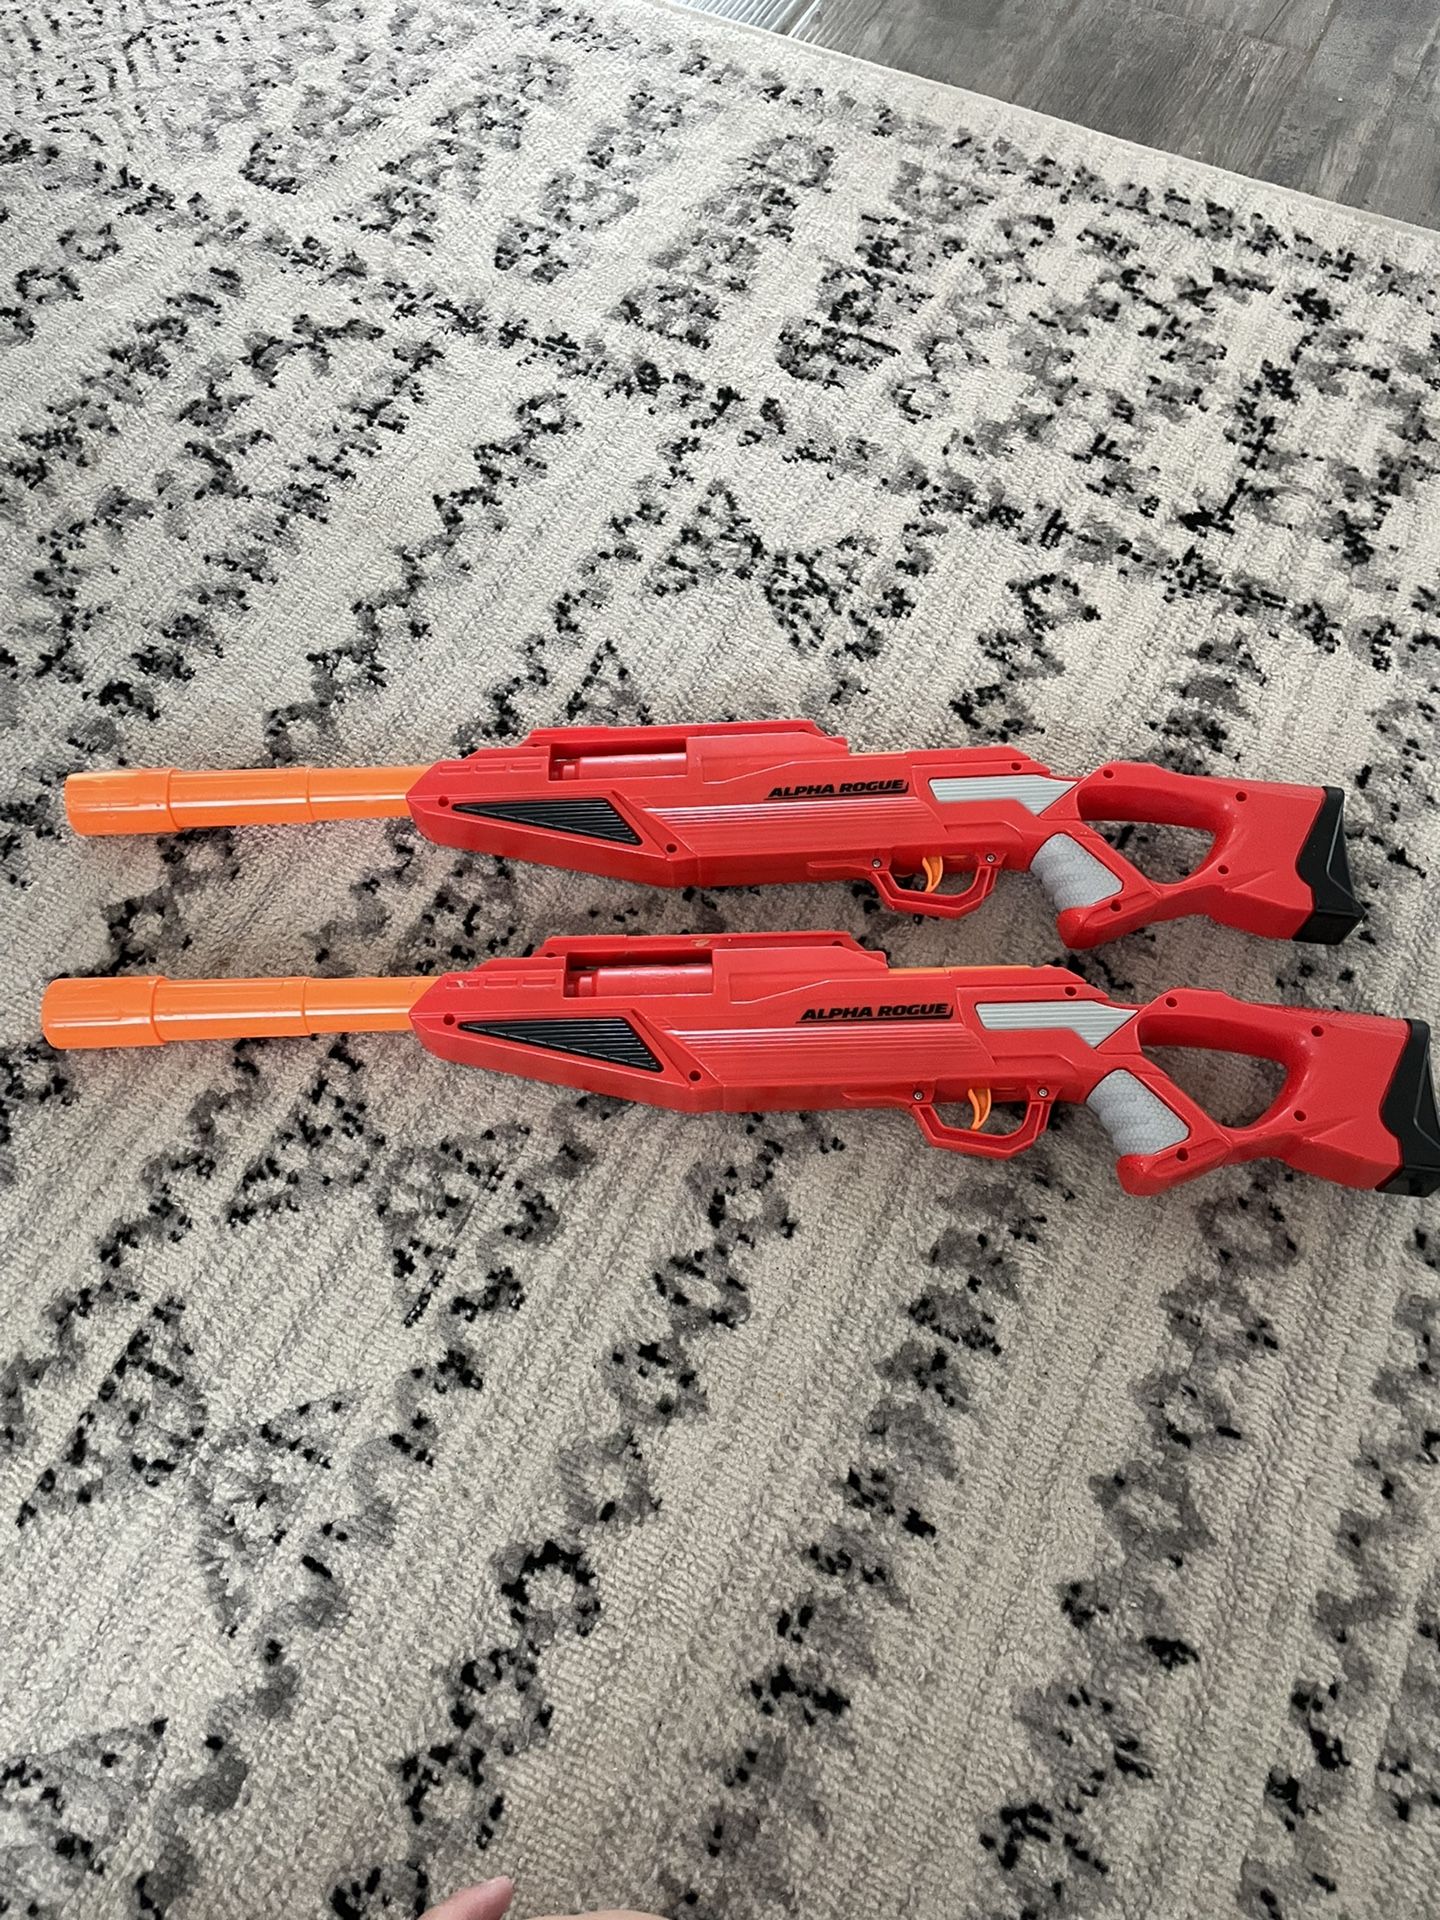 Nerf Guns/ Rival & Alpha Rouge/Adventure force